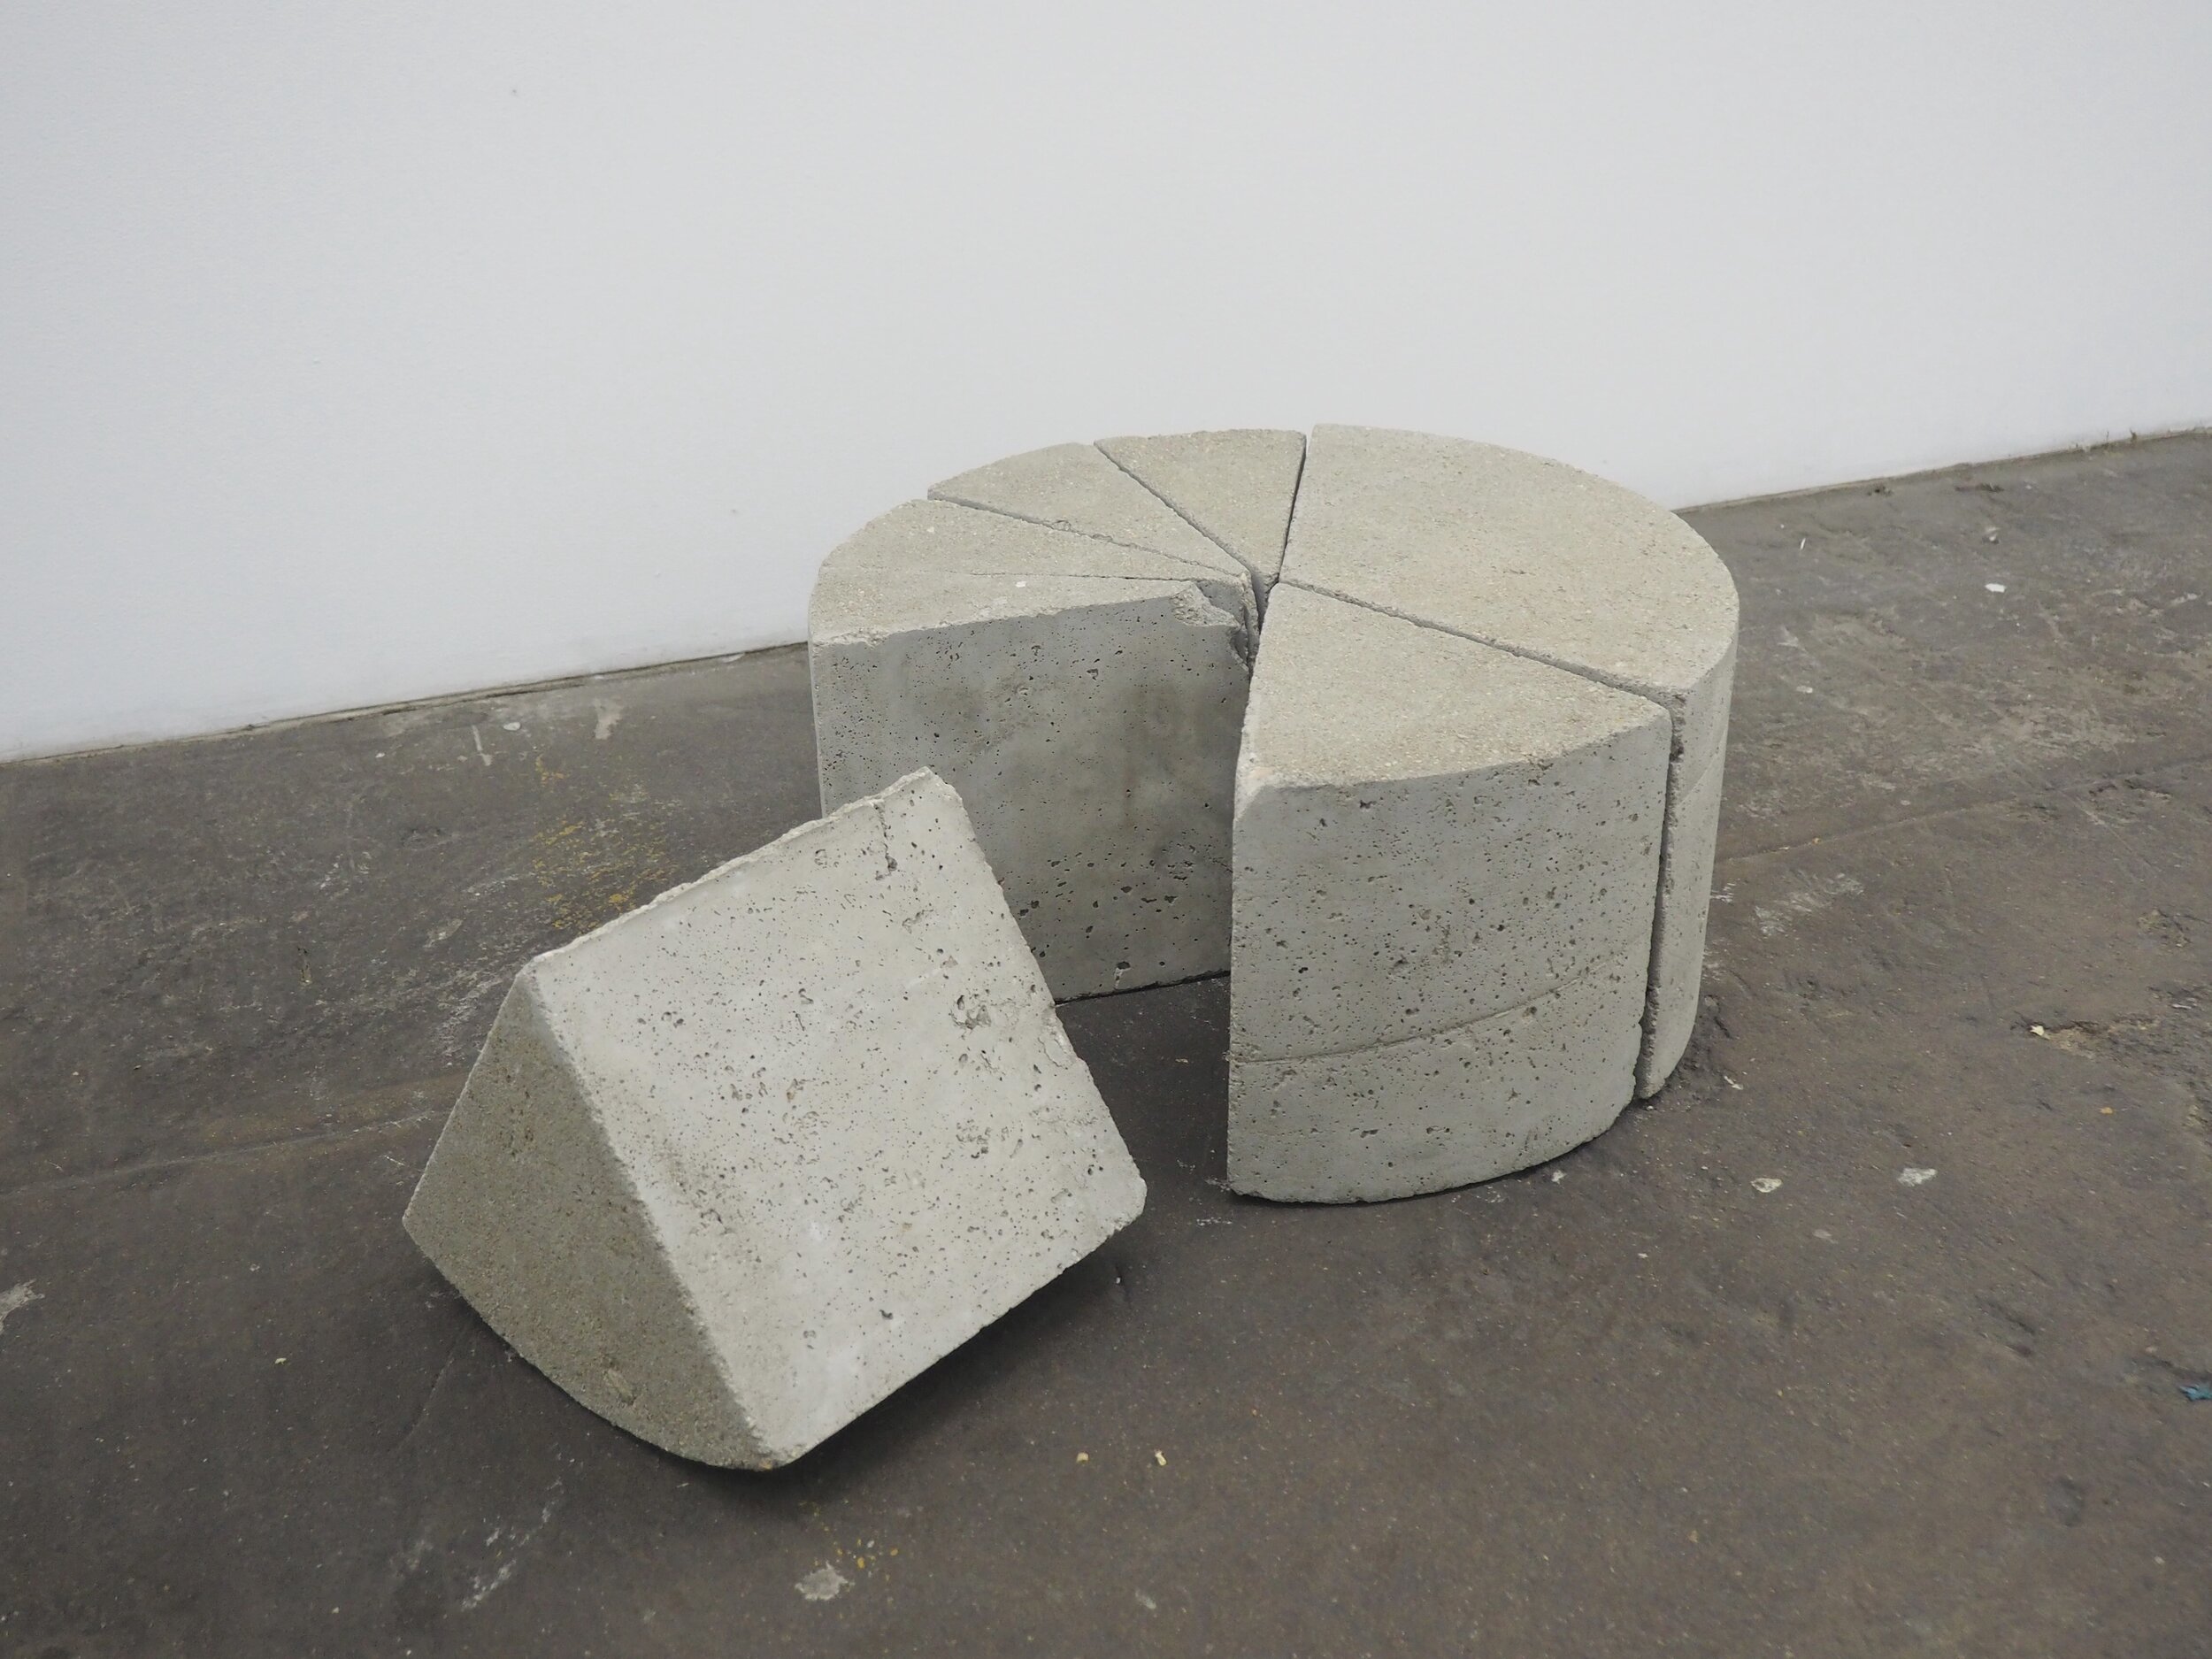  Josh Callaghan  Work Place Injury By Type , 2008  cement 9 x 18 x 18 in (22.9 x 45.7 x 45.7 cm) 